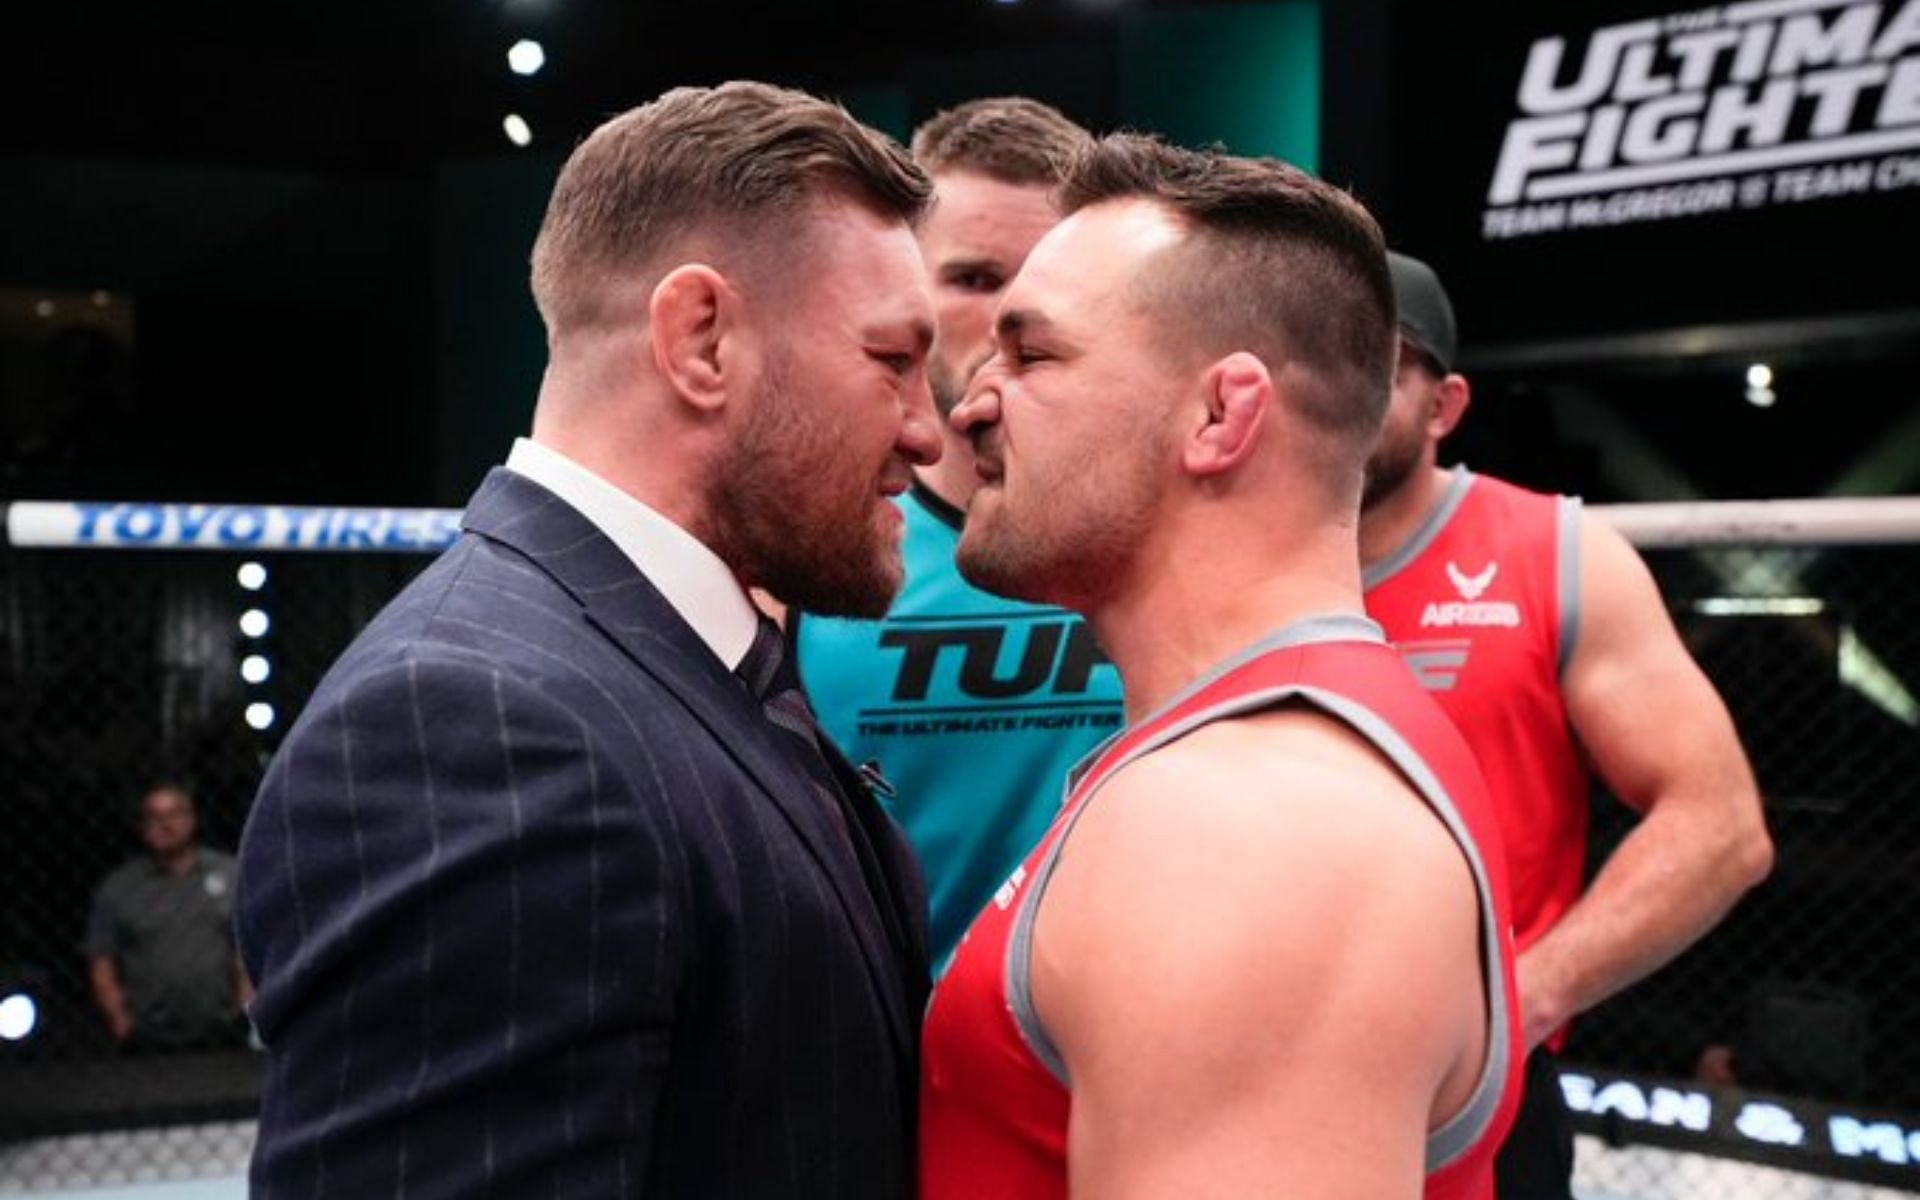 Conor McGregor and Michael Chandler are building their coaching rivalry [Image Credit: @UltimateFighter on Twitter]